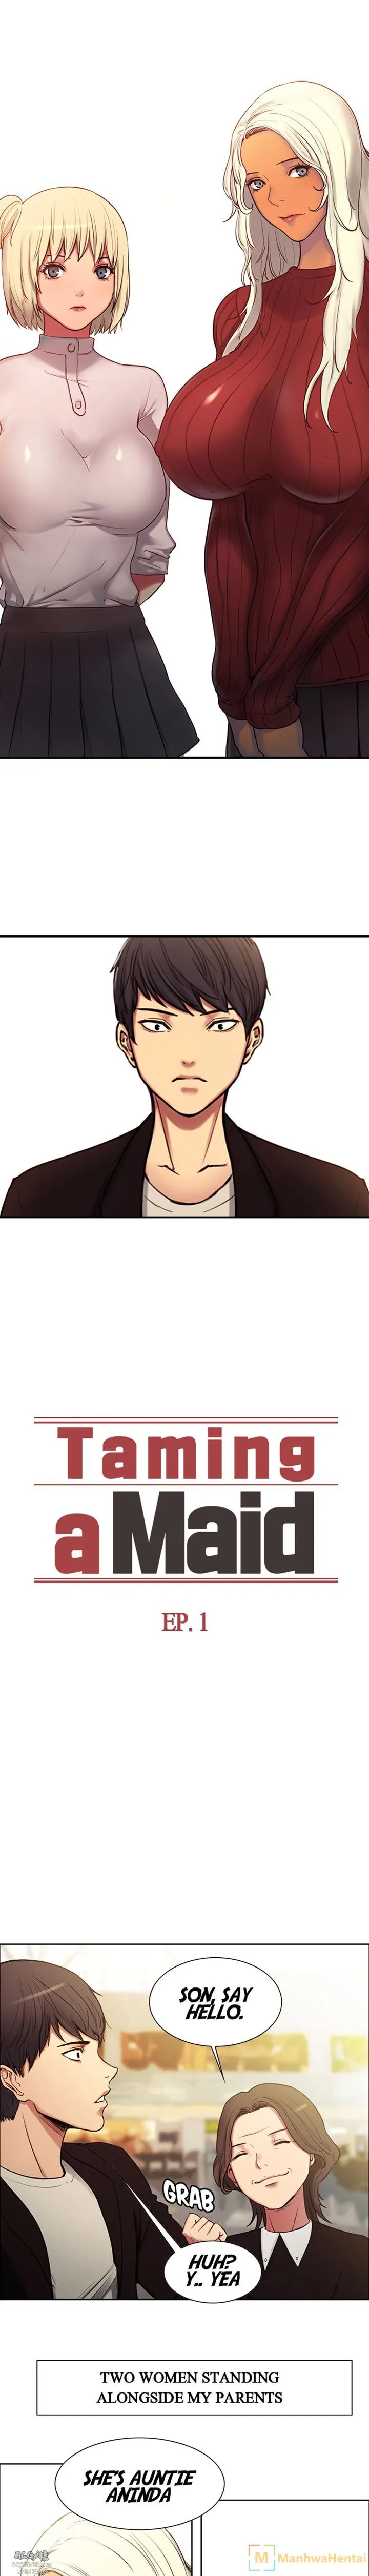 [Serious] Taming a Maid/Domesticate the Housekeeper (Chapter 1) [English]